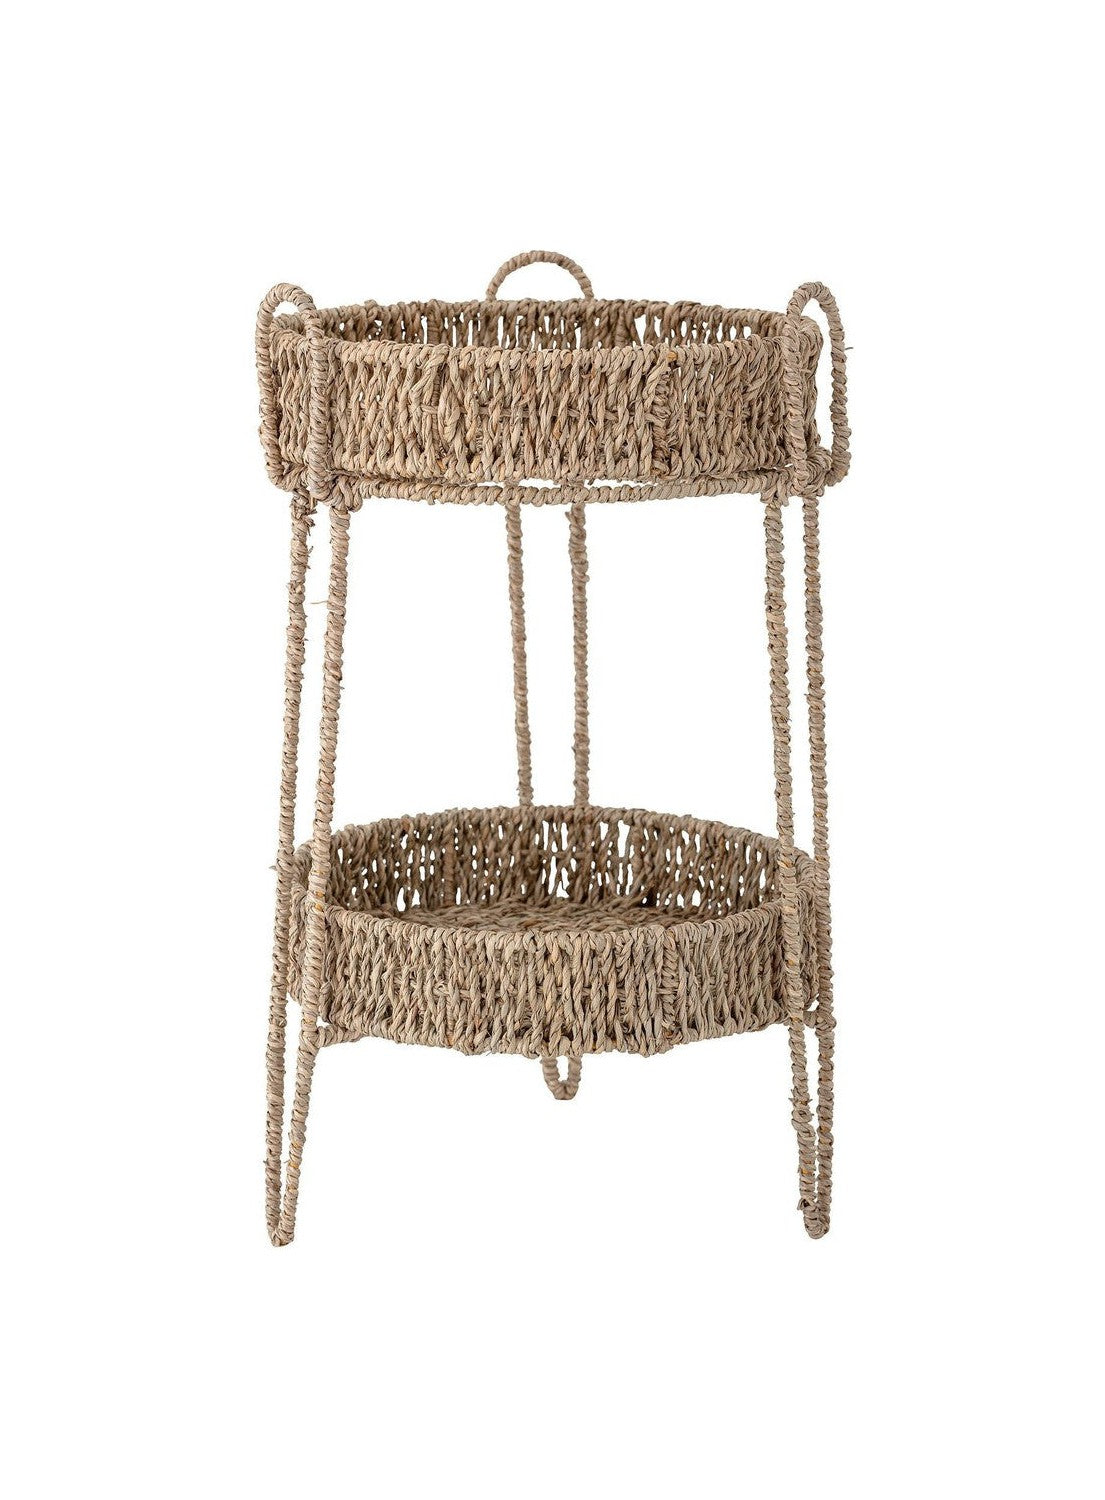 Bloomingville Hany Etagere, Nature, Seagrass